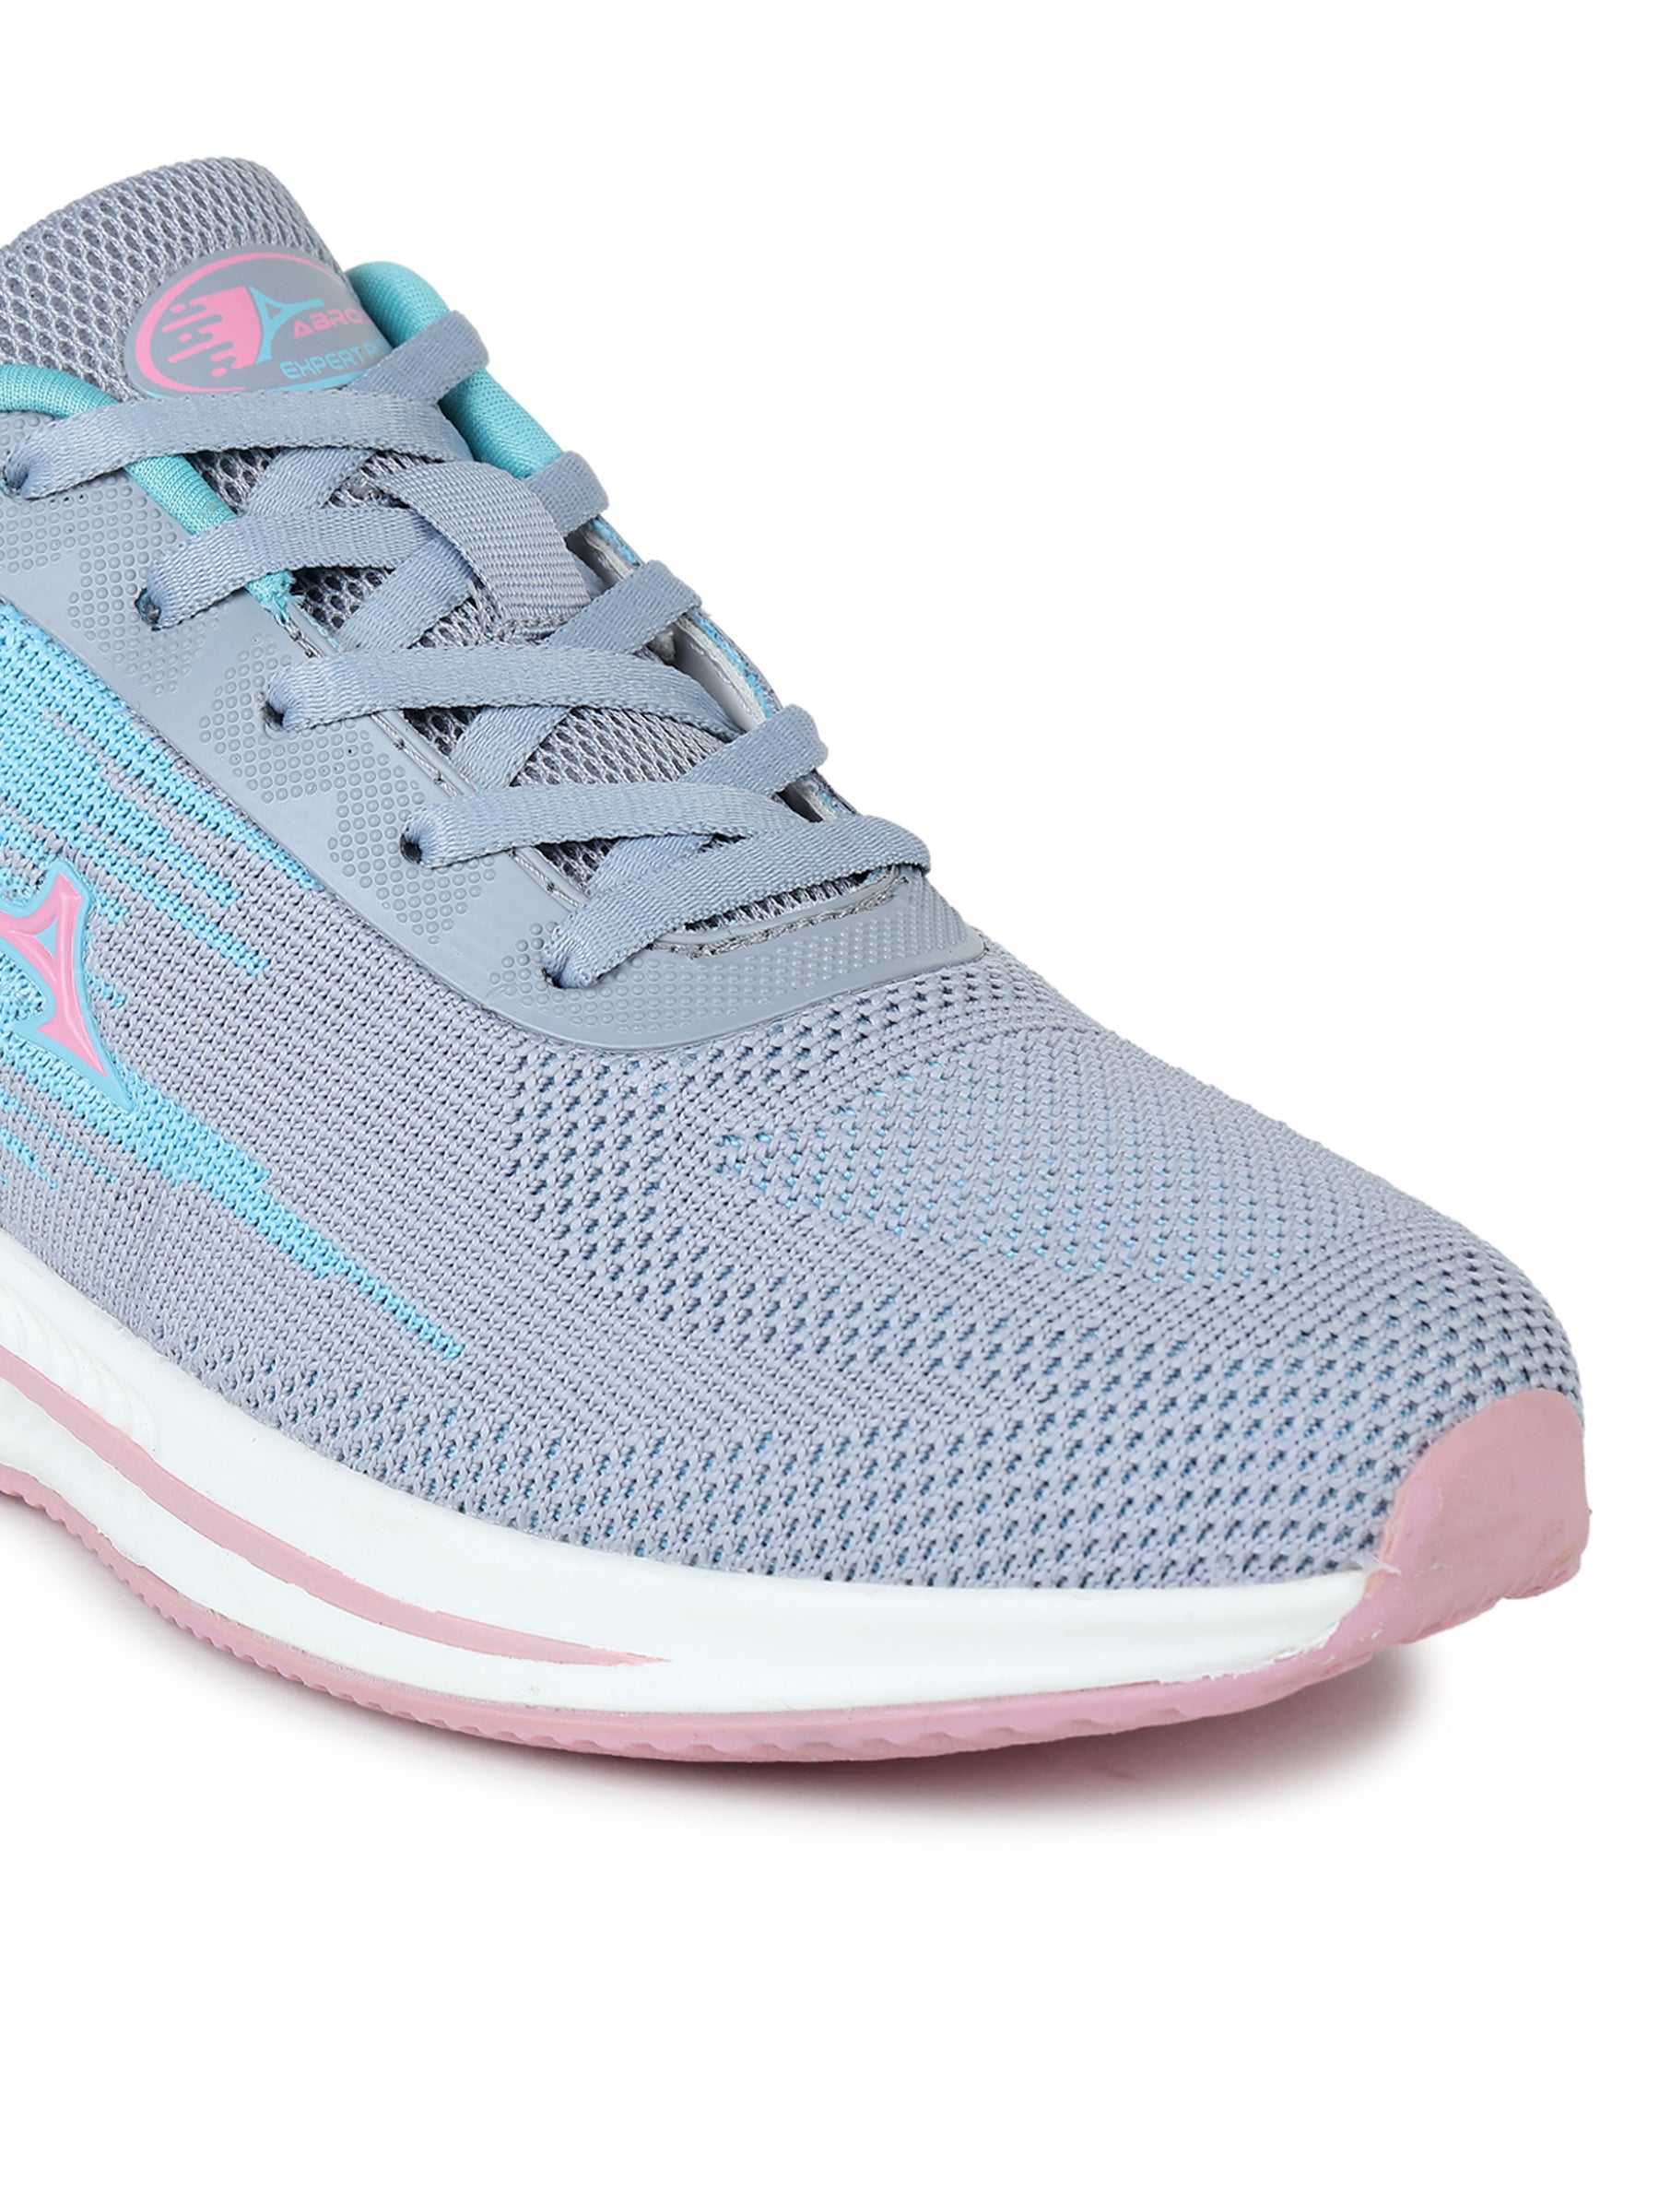 ABROS MELODY SPORTS SHOES FOR WOMEN